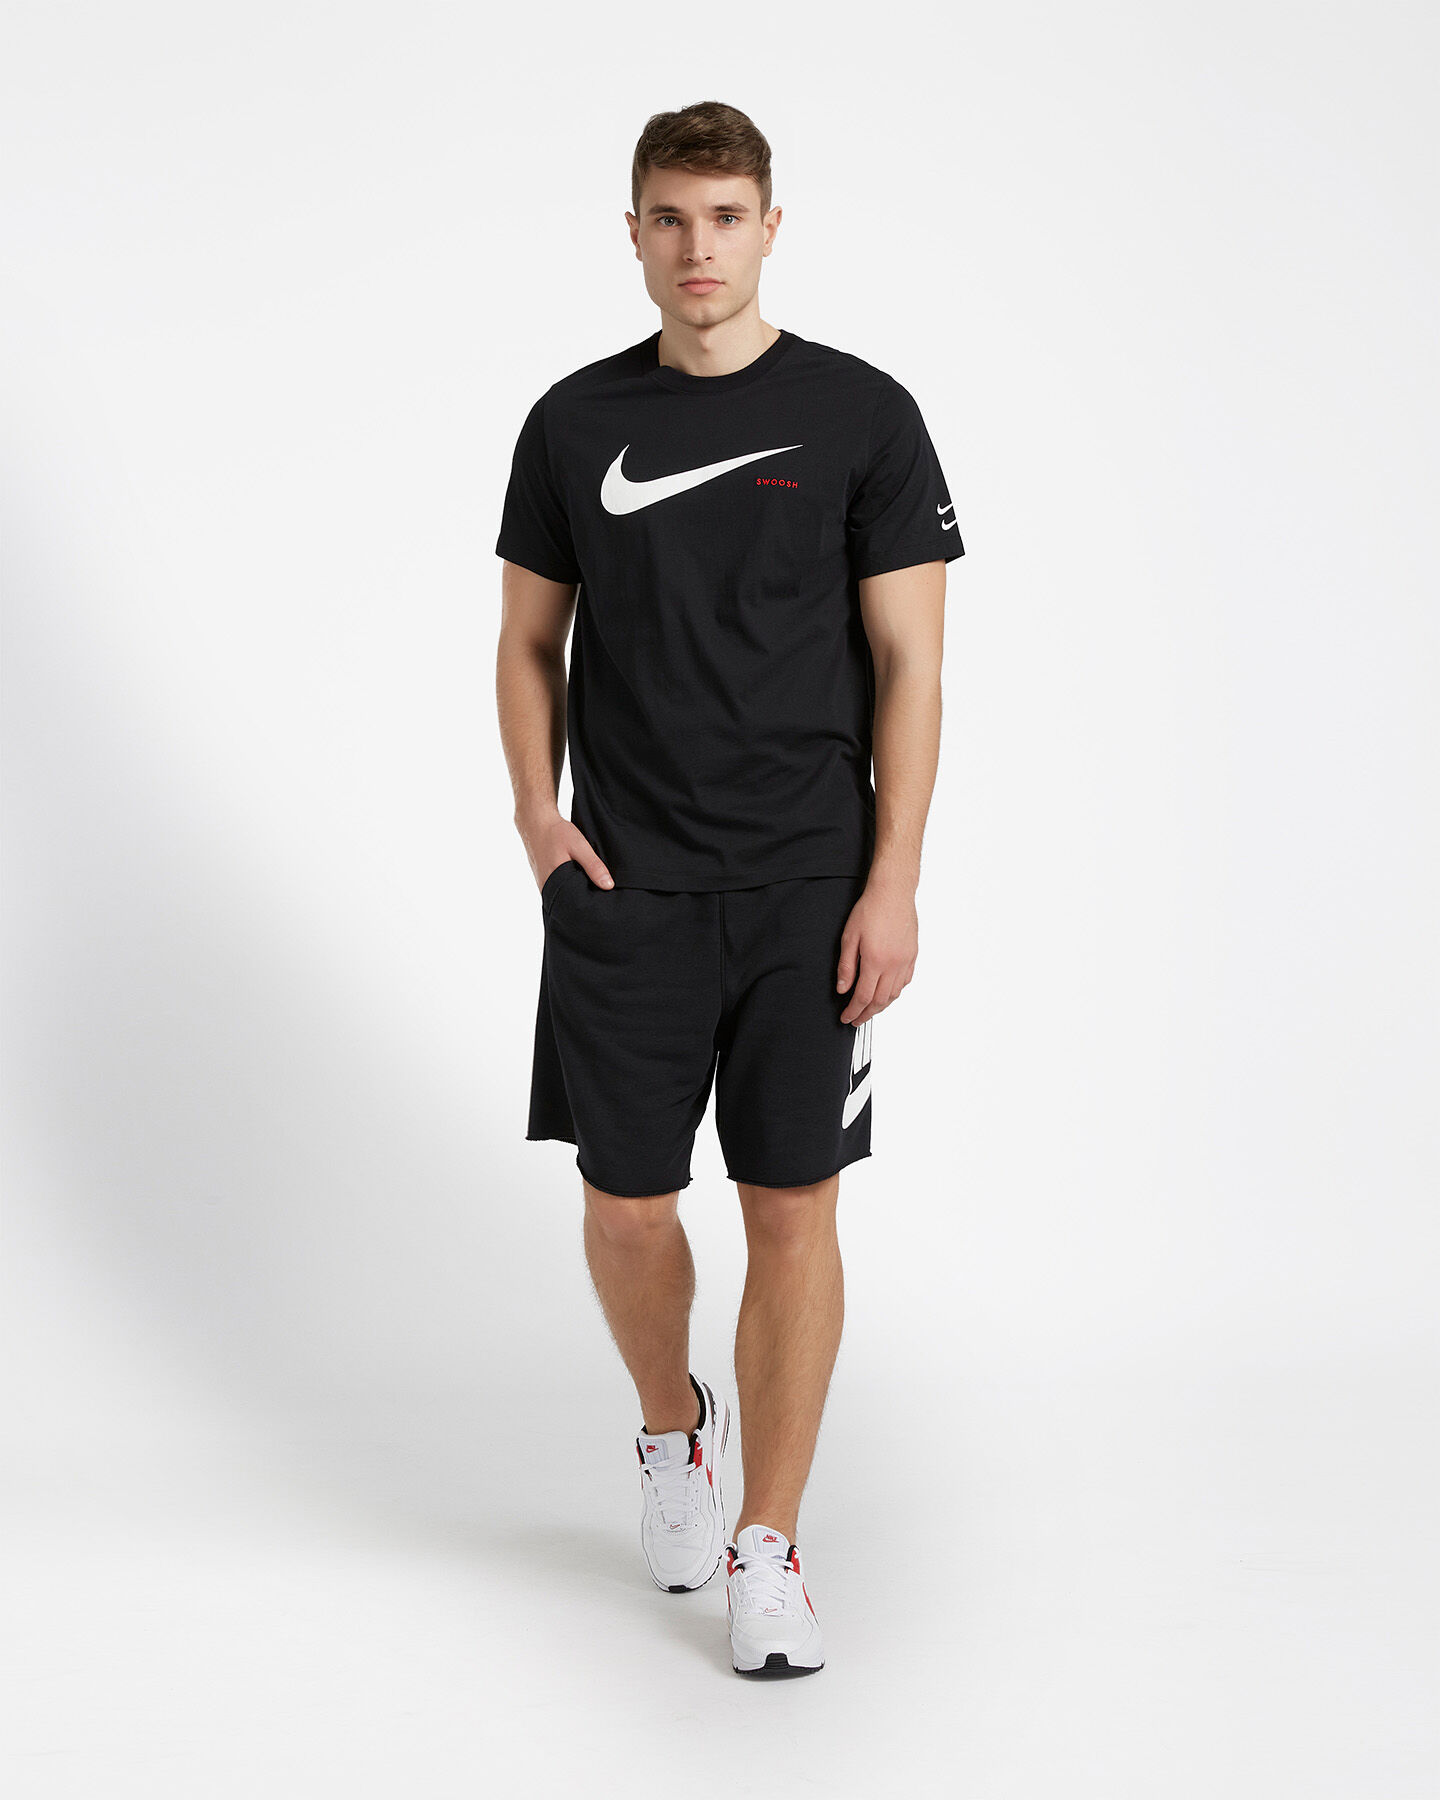  T-Shirt NIKE SWOOSH M S5164730|010|S scatto 3